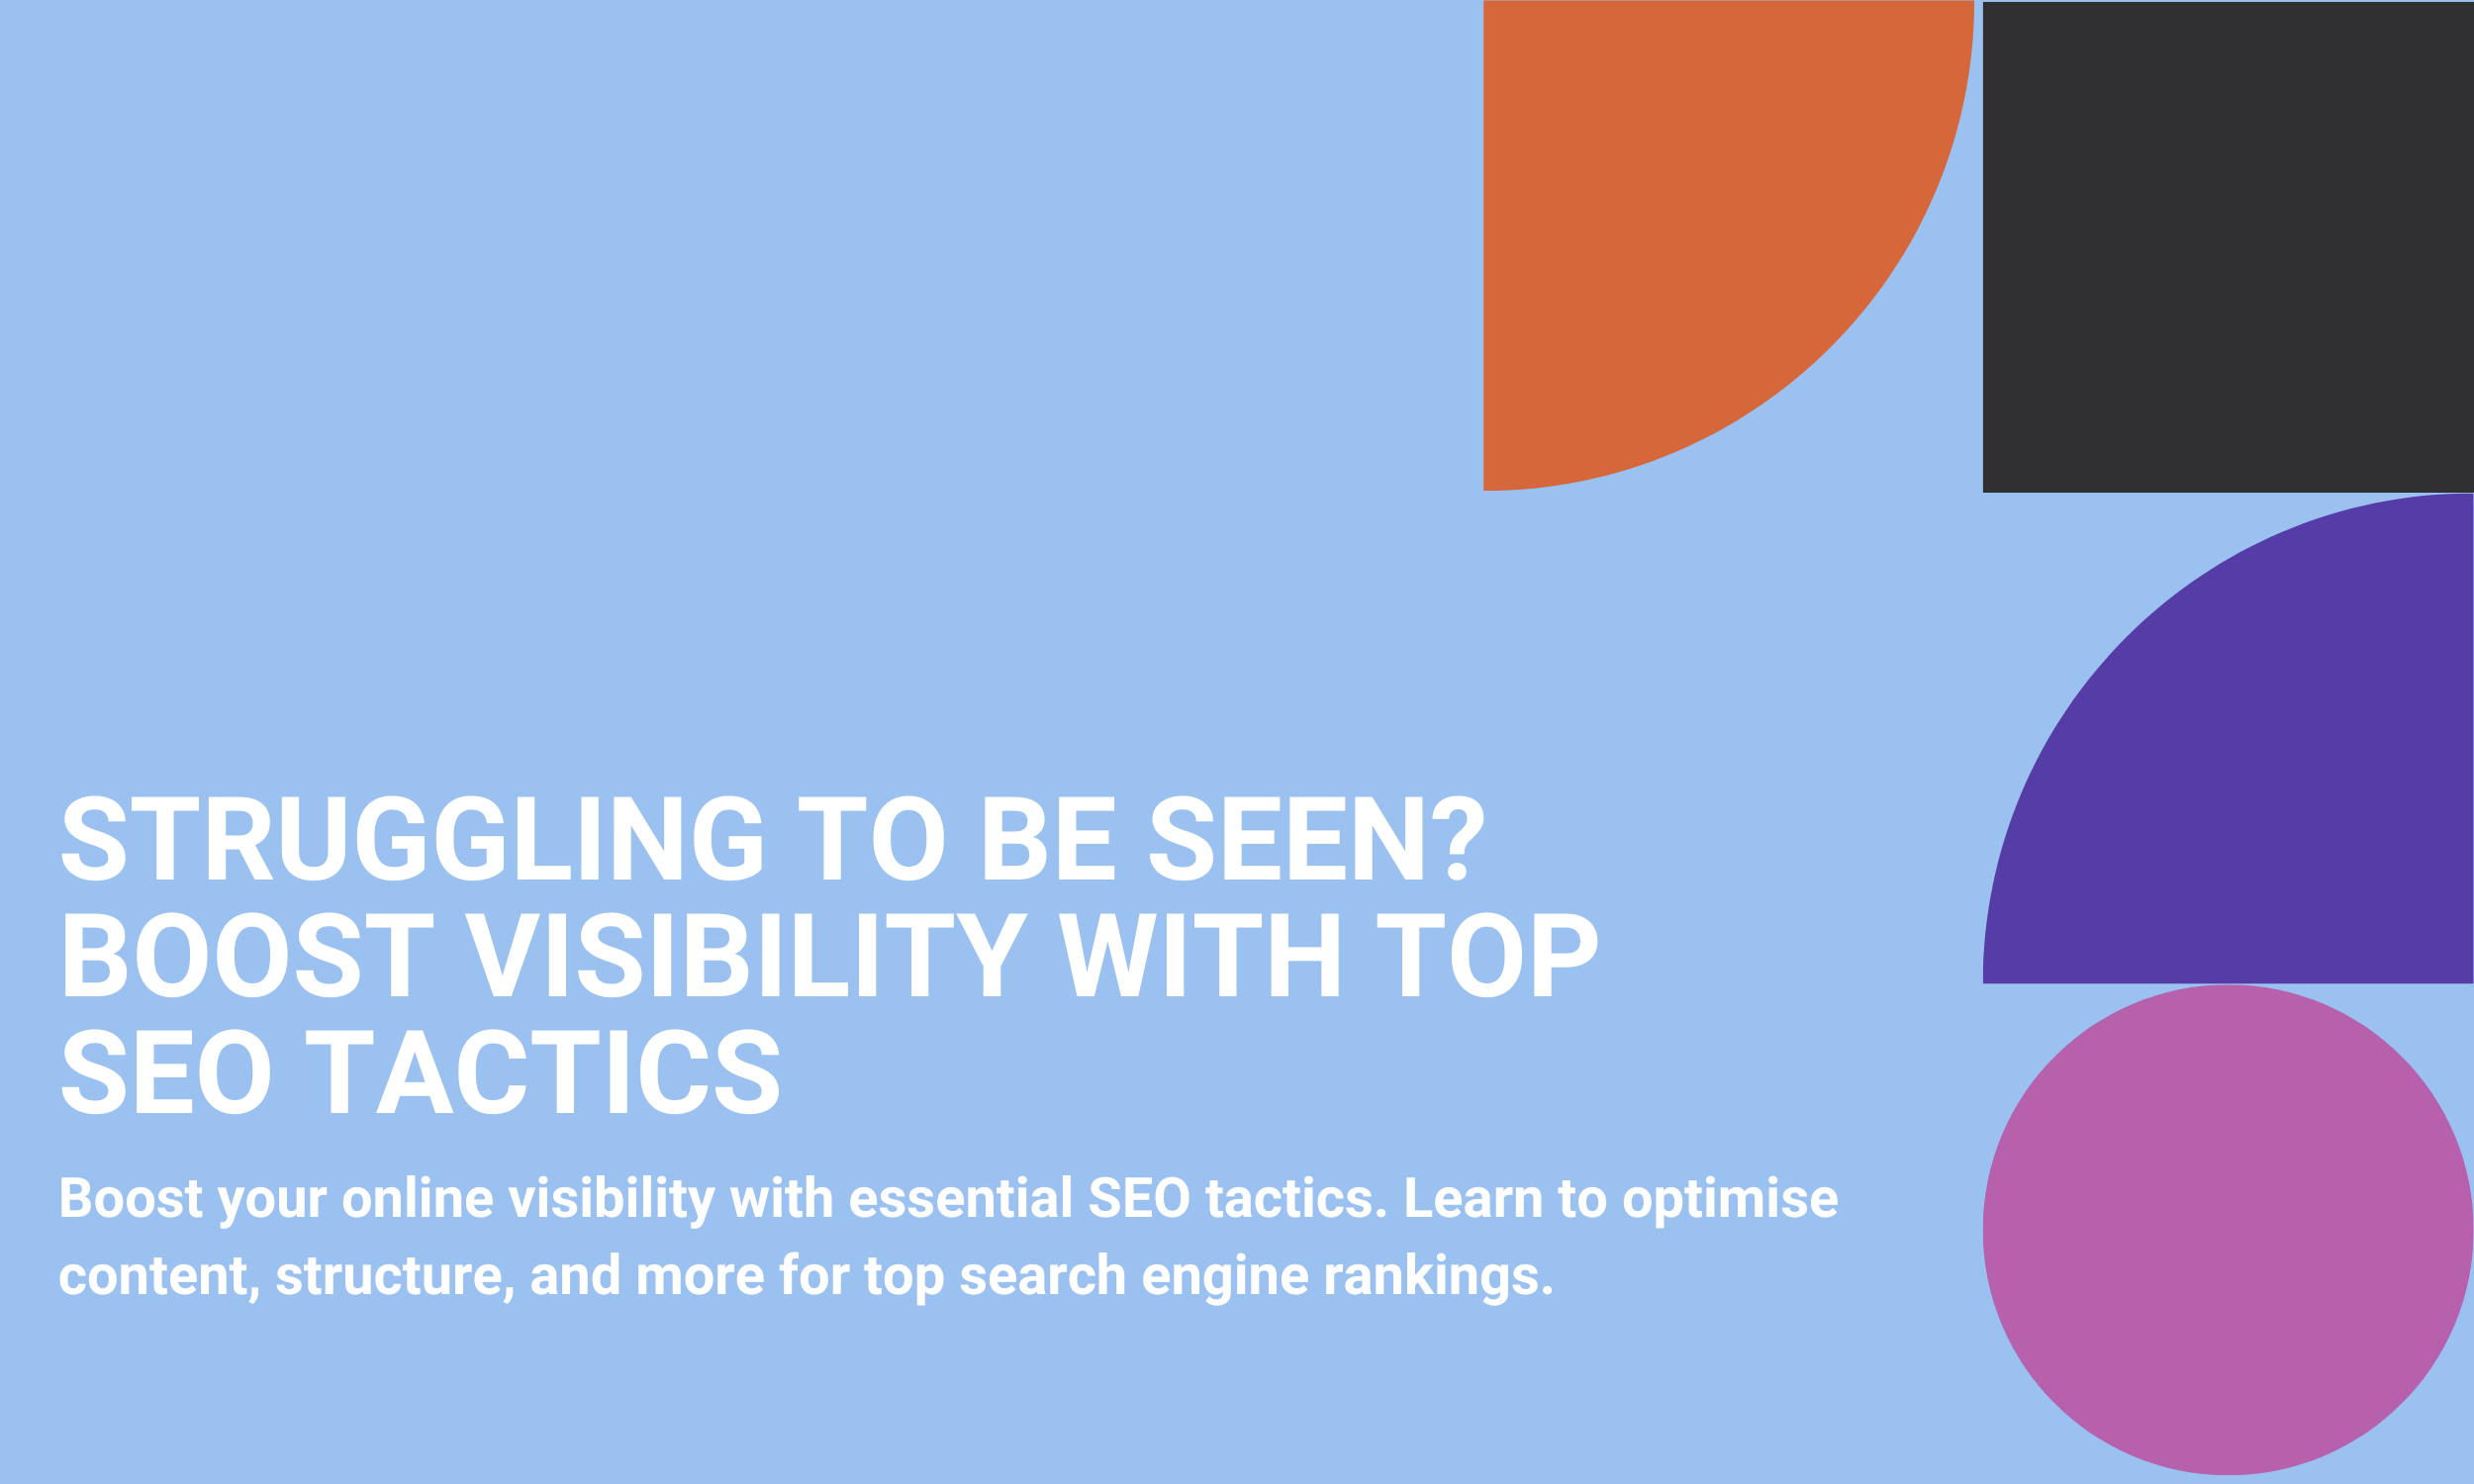 Struggling to Be Seen? Boost Visibility with Top SEO Tactics